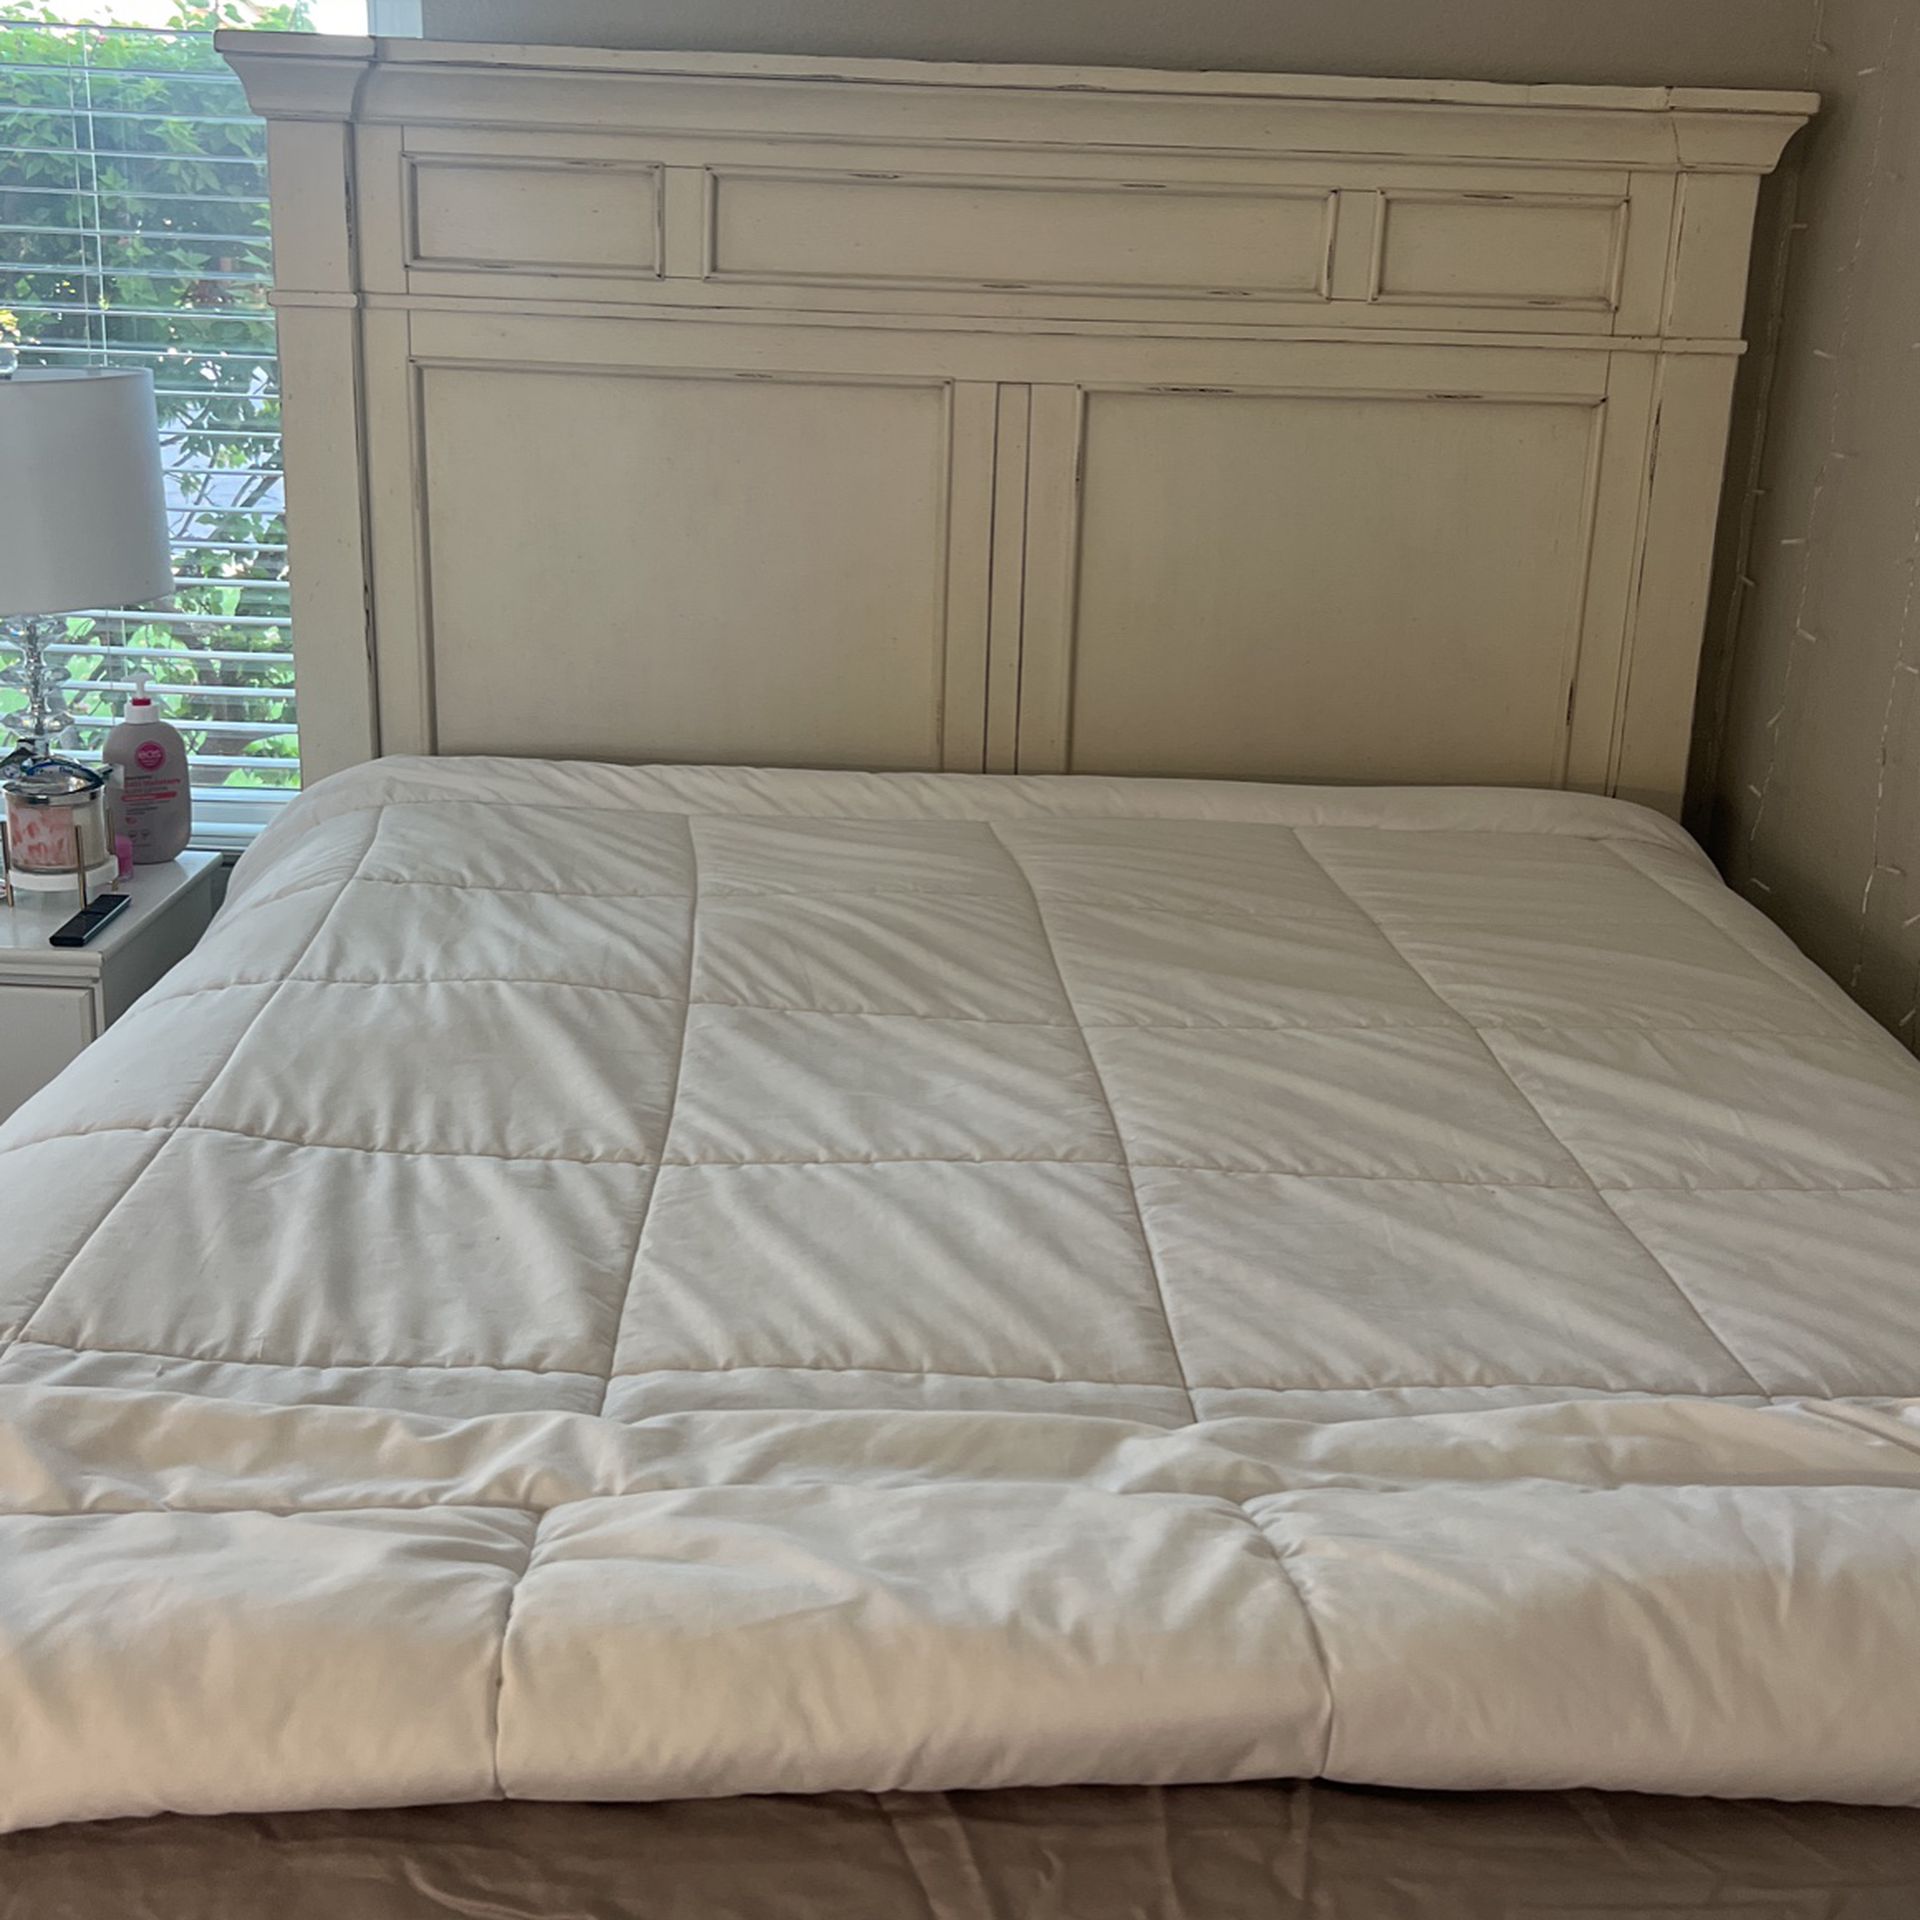 Wooden Queen Size Bed frame